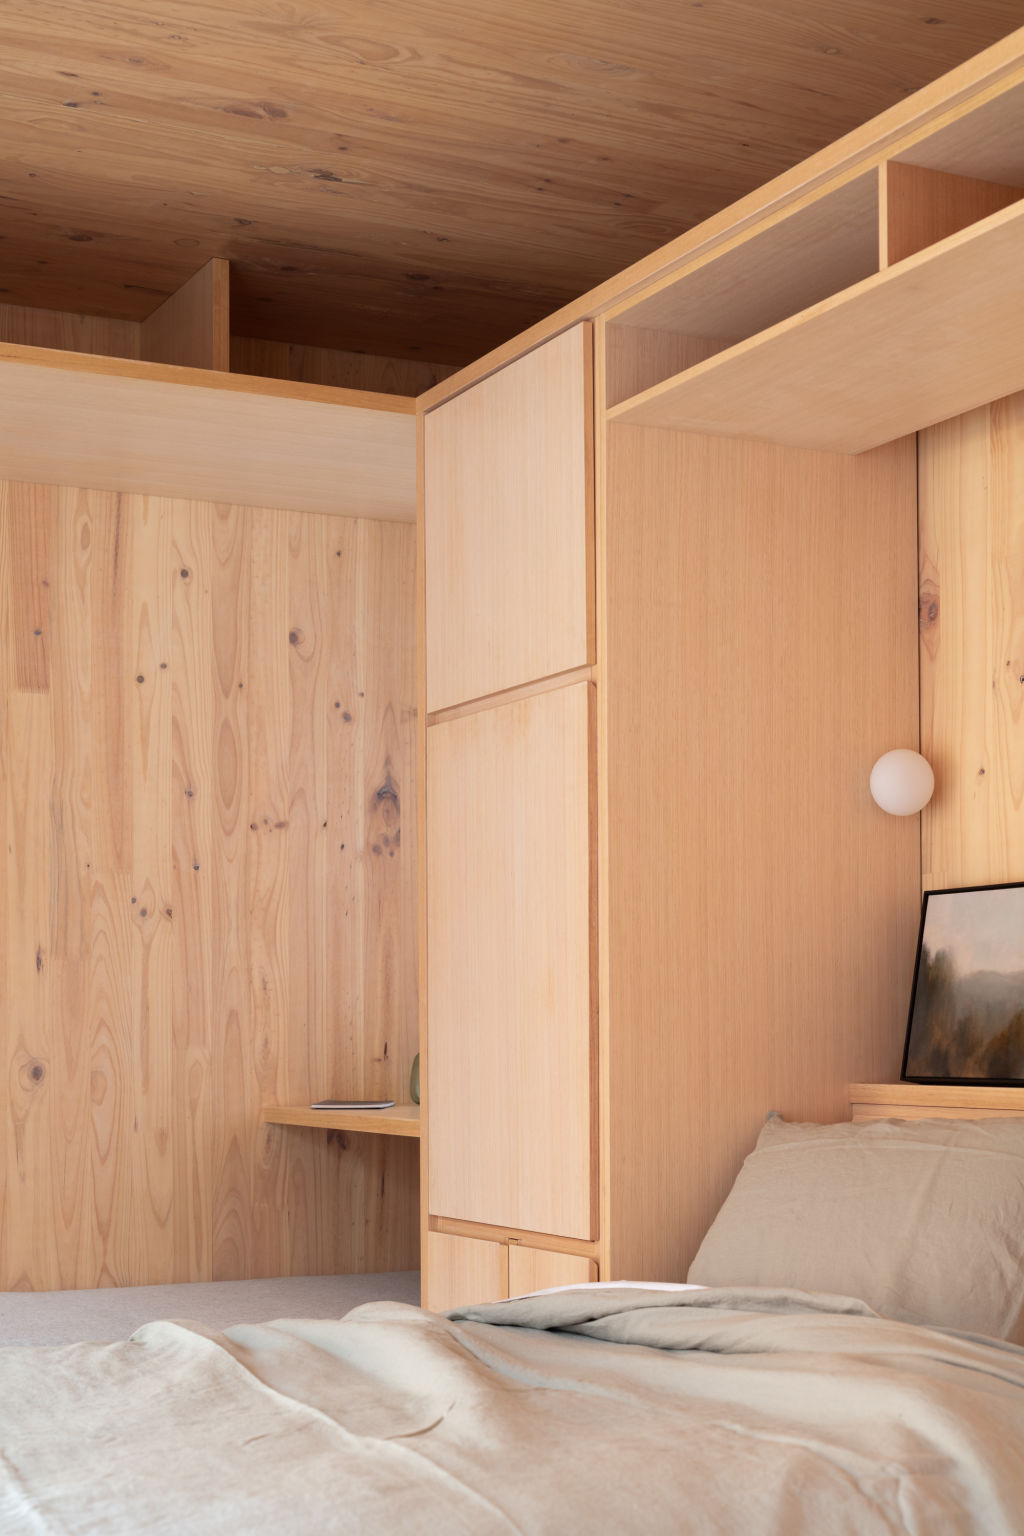 The design inspiration was found in Japanese and Scandinavian architecture. Photo: Clinton Weaver